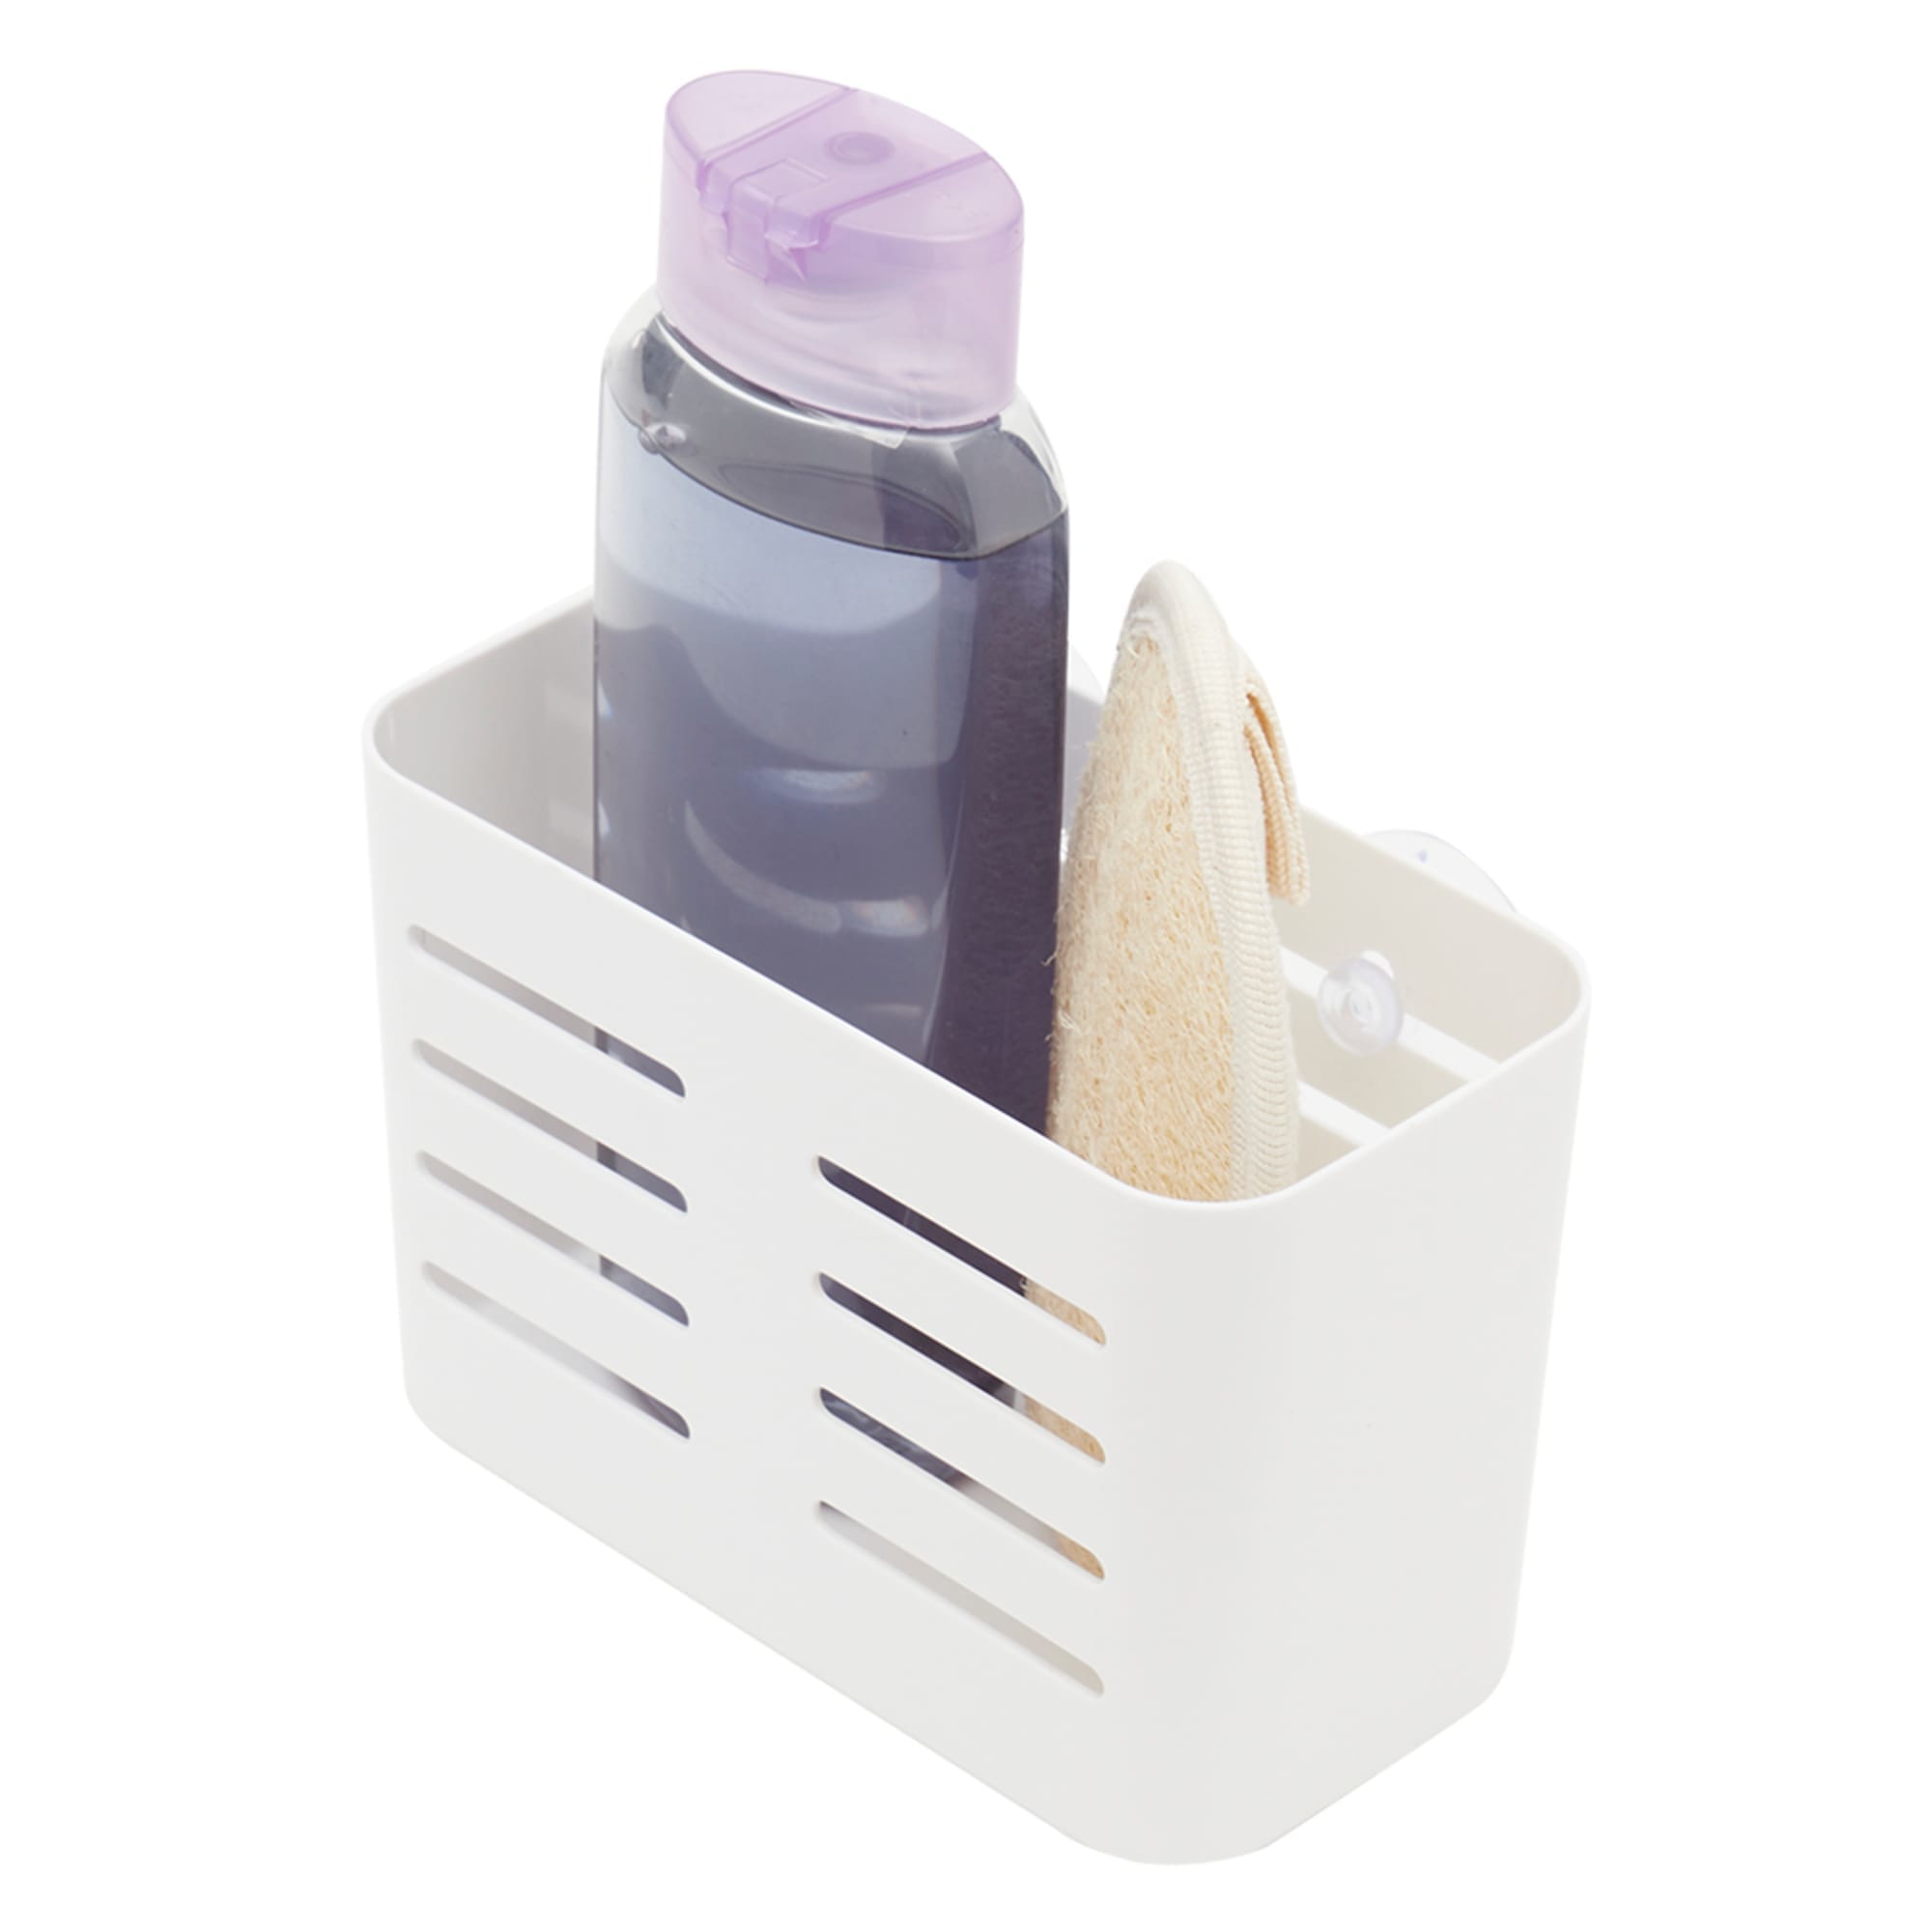 Home Basics Serenity Bath Caddy with Suction $2.50 EACH, CASE PACK OF 24